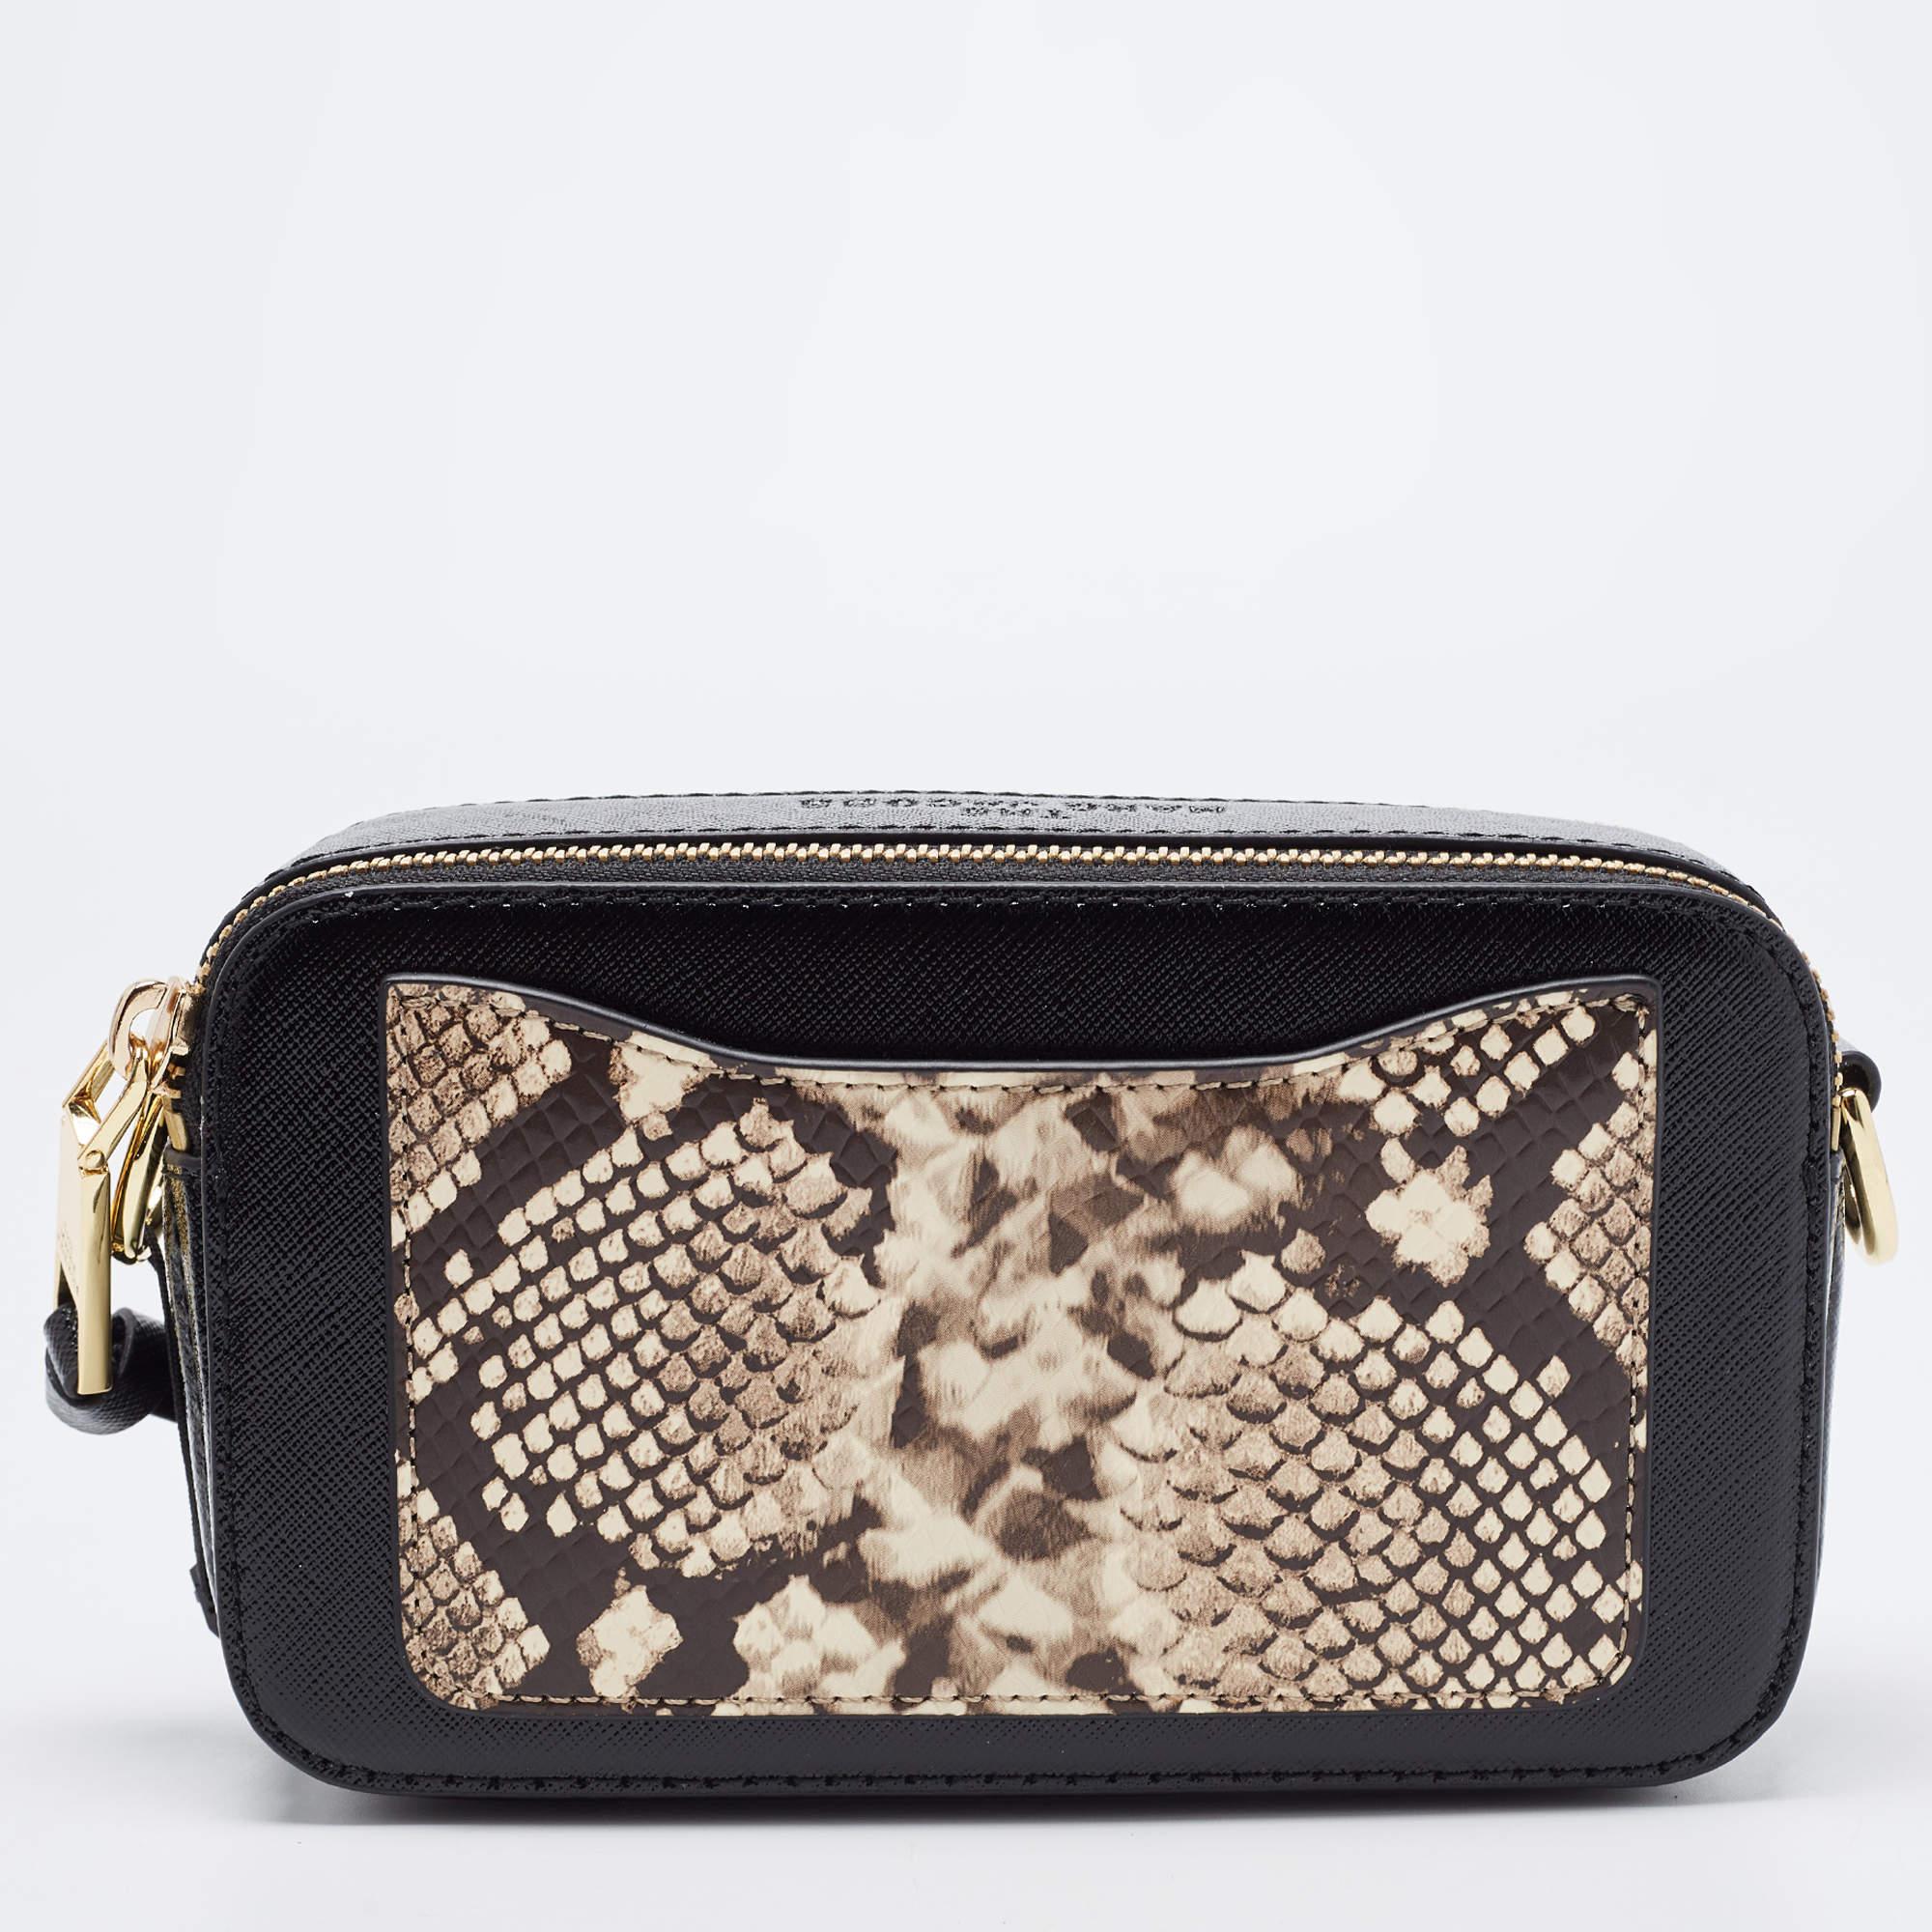 This cute crossbody bag from Marc Jacobs will be your most preferred grab-and-go companion. Made from leather, it features a fabric-lined interior, an external open pocket at the back, and a shoulder strap. While the brand signature on the front